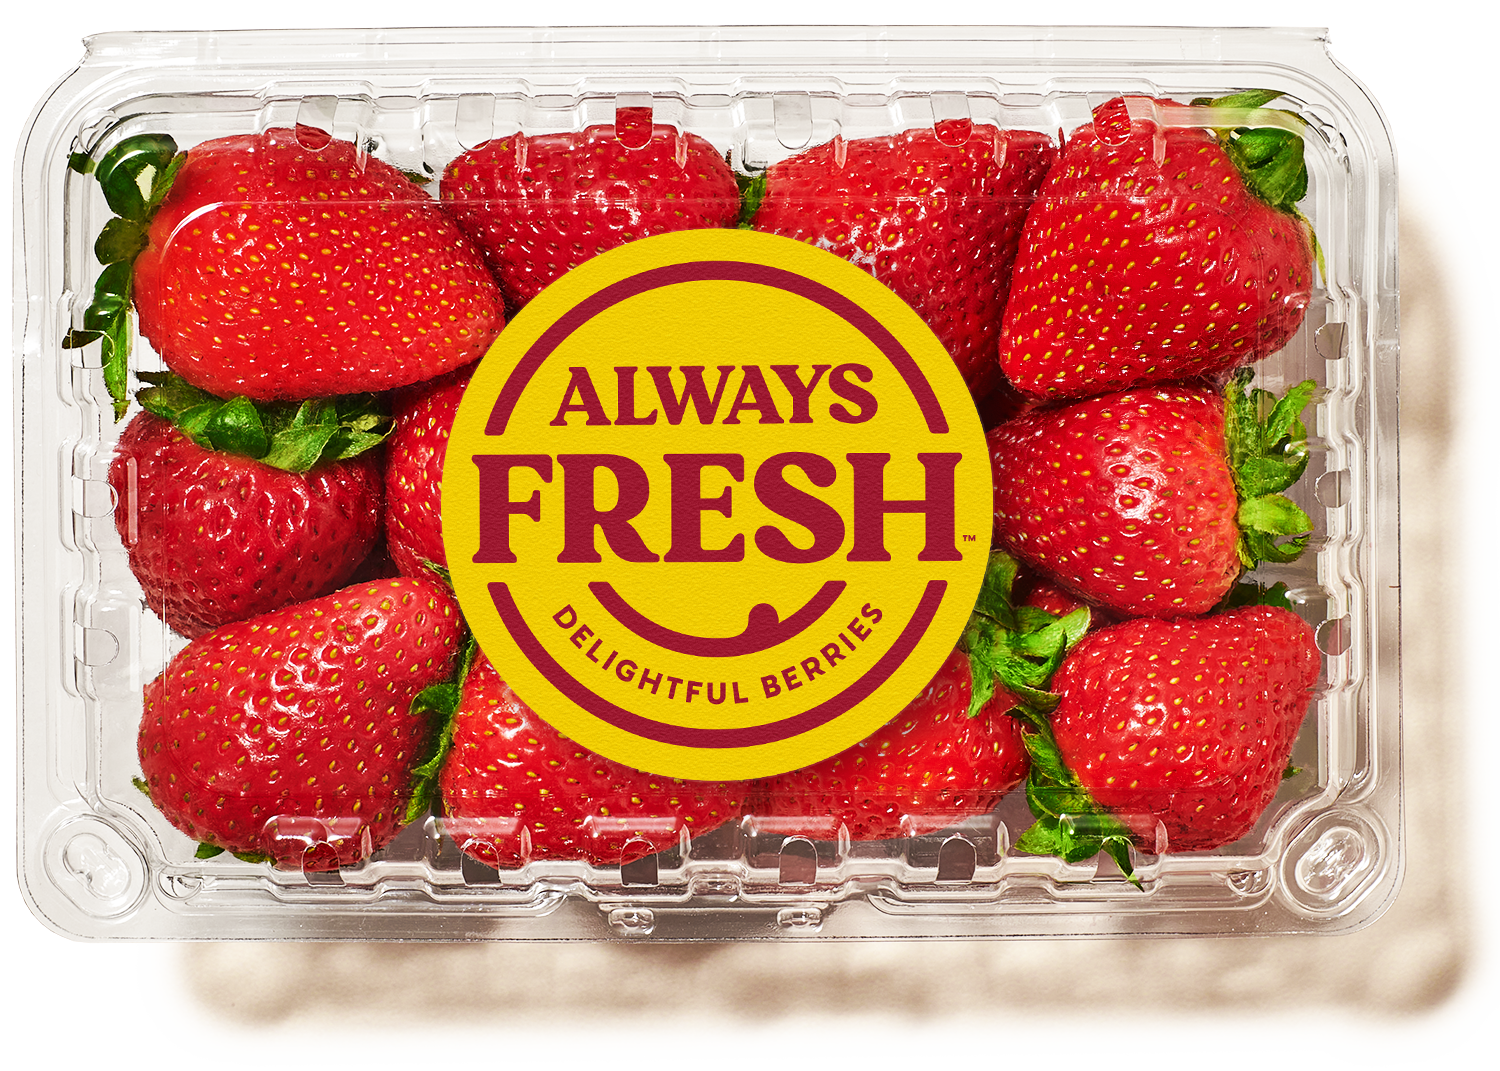 Image of Always Fresh strawberries in clear container with Always Fresh logo and the tag line Delightful Berries.